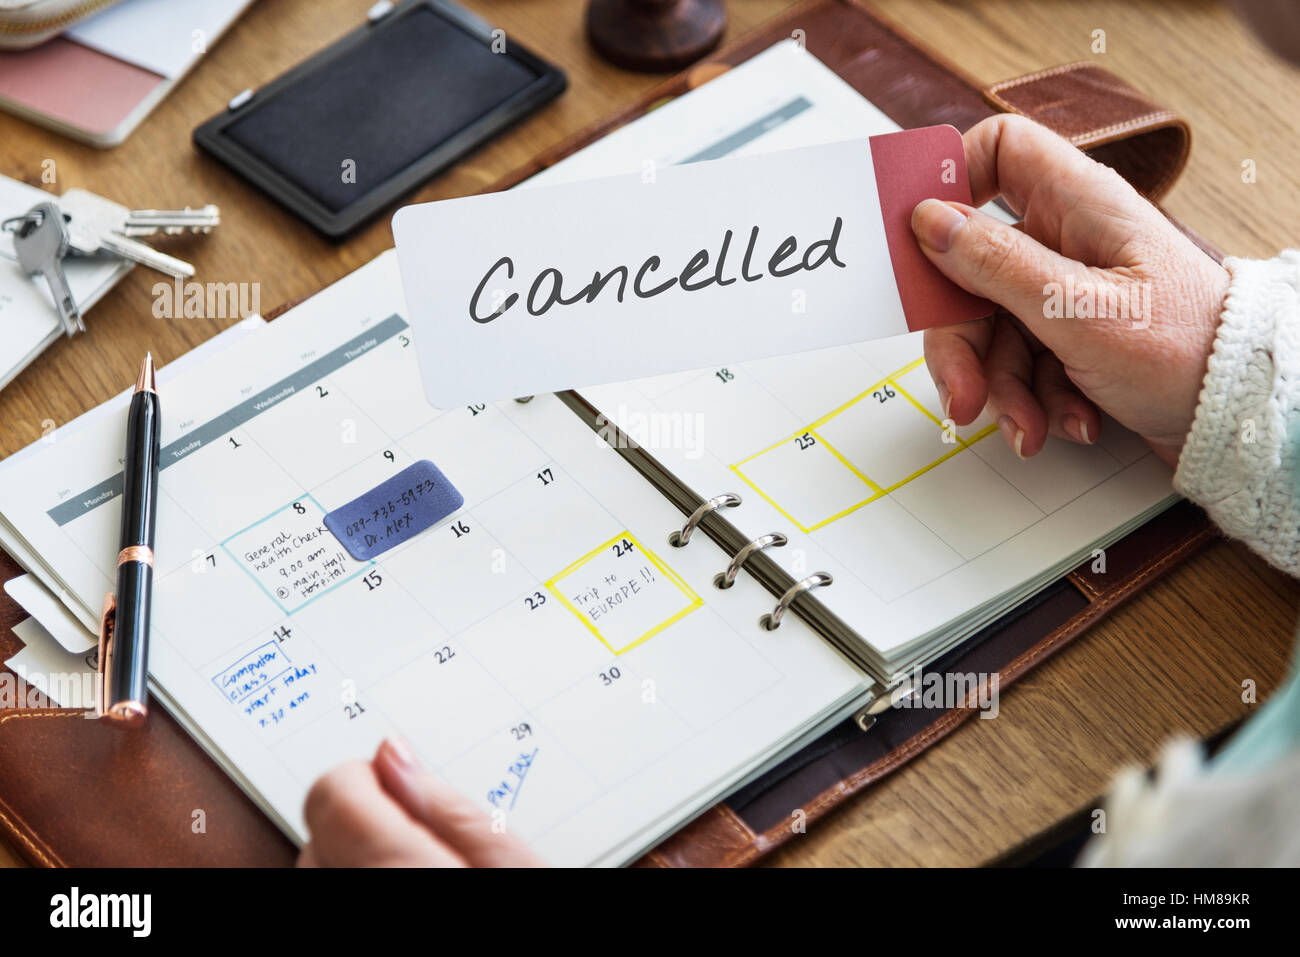 Cancelled Rejected Abort Declined Cancellation Denied Concept Stock Photo